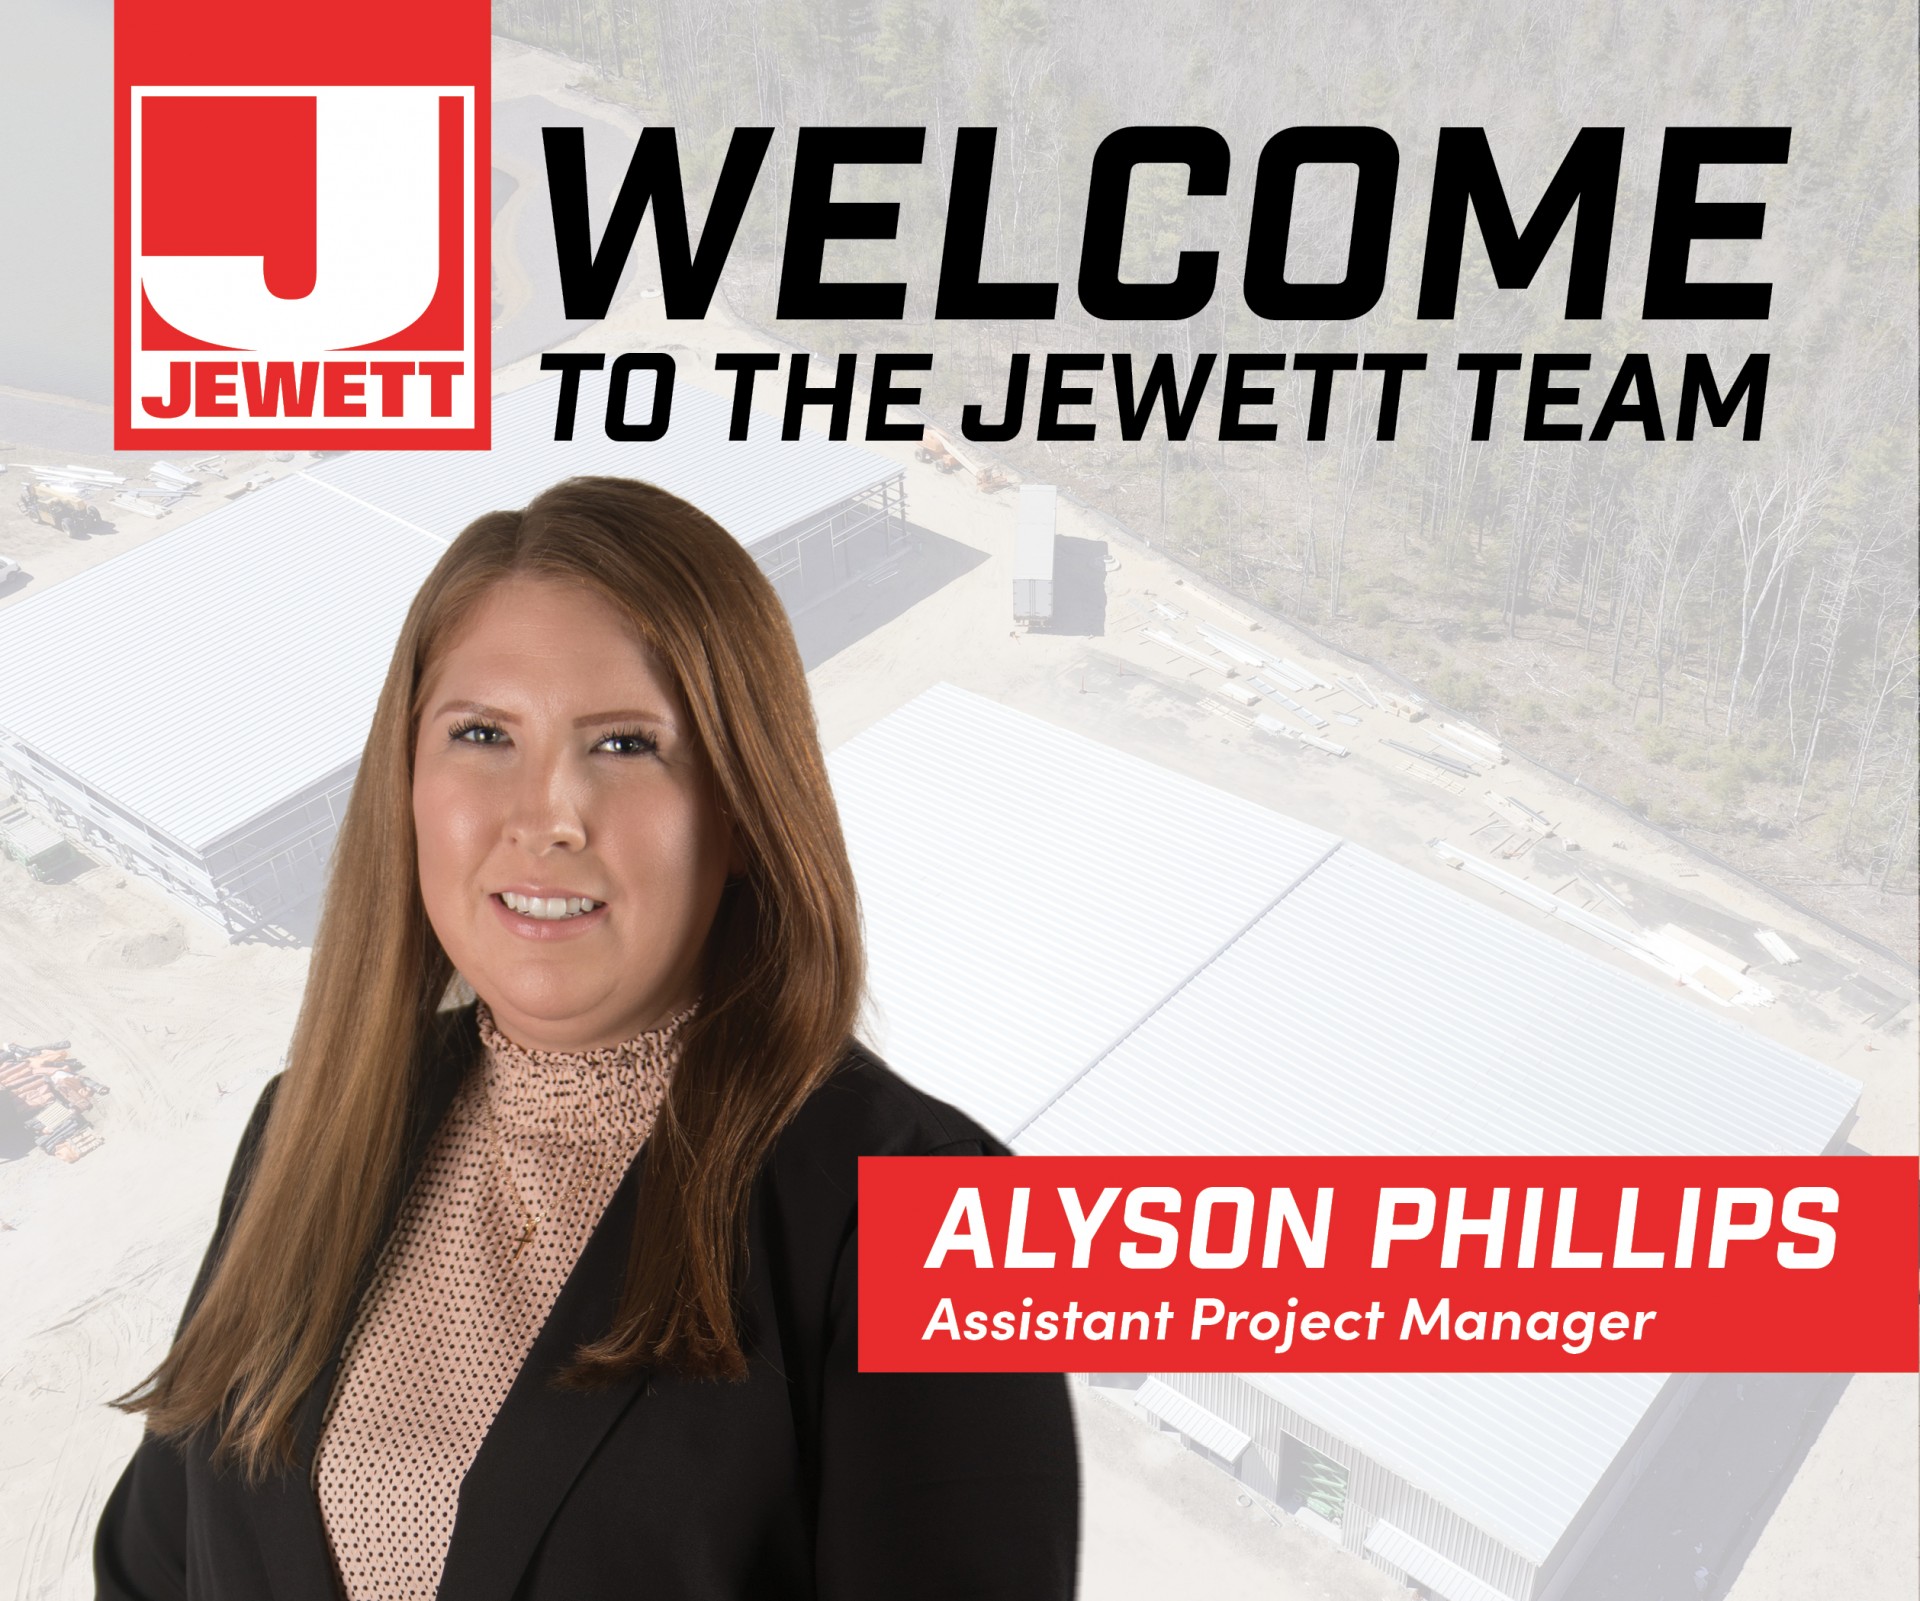 Jewett Construction Welcomes Alyson Phillips to Our Team